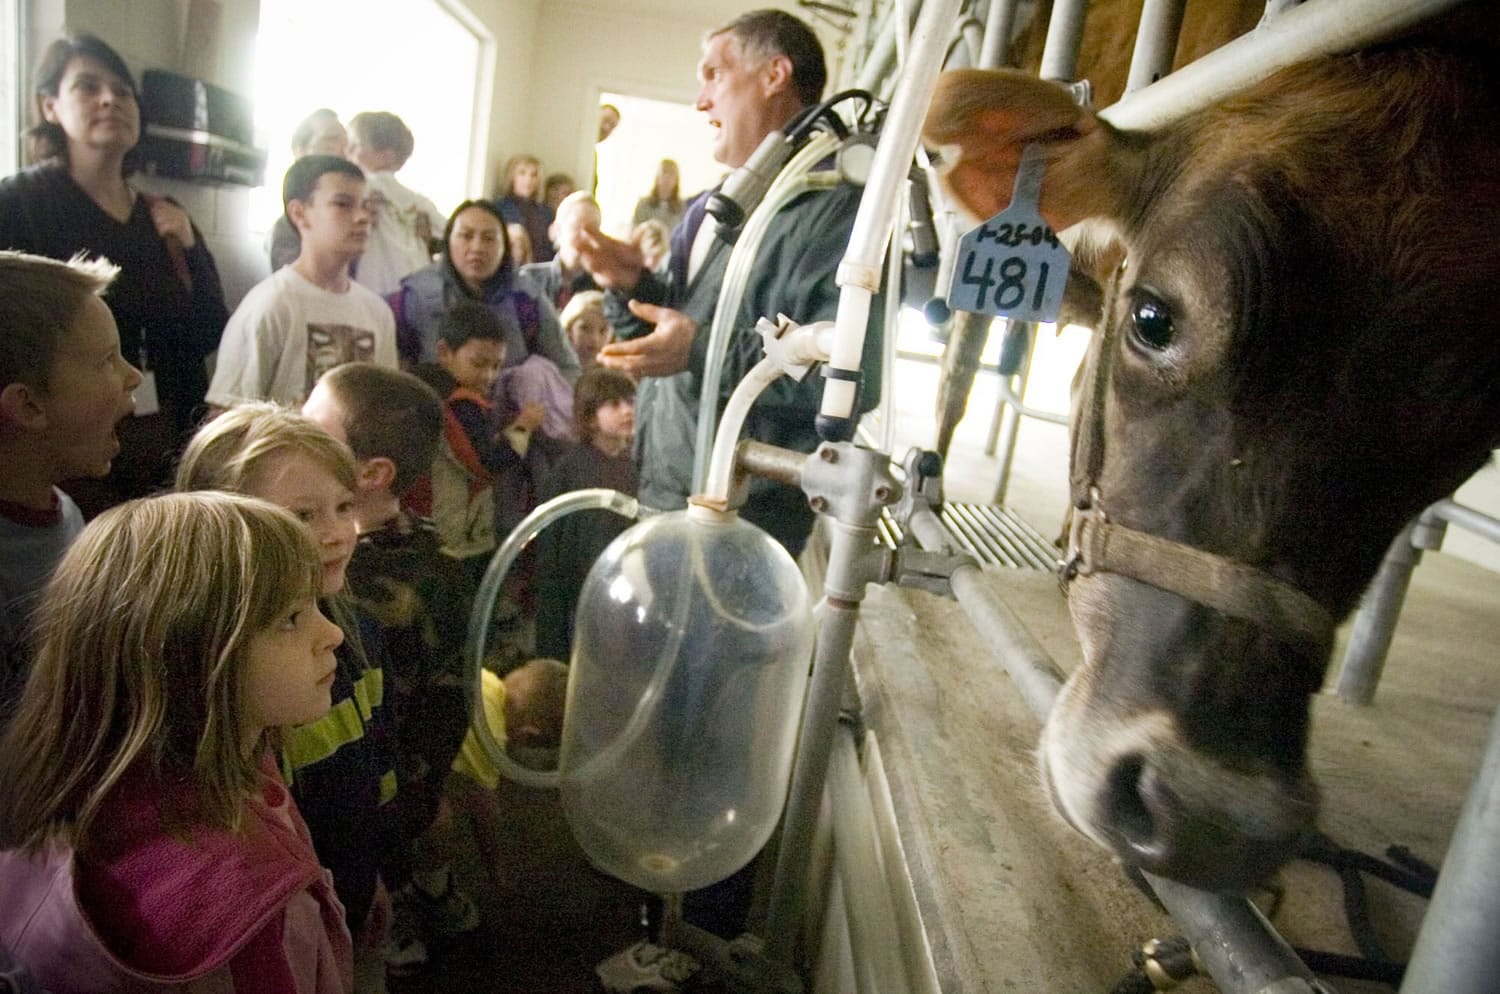 Gerrit VanTol, from Vantol Dairy, and &quot;Lady,&quot; teach kids from River HomeLink the process of milking a cow during Dairy Days at the Clark County Fairgrounds in a 2006 photo.